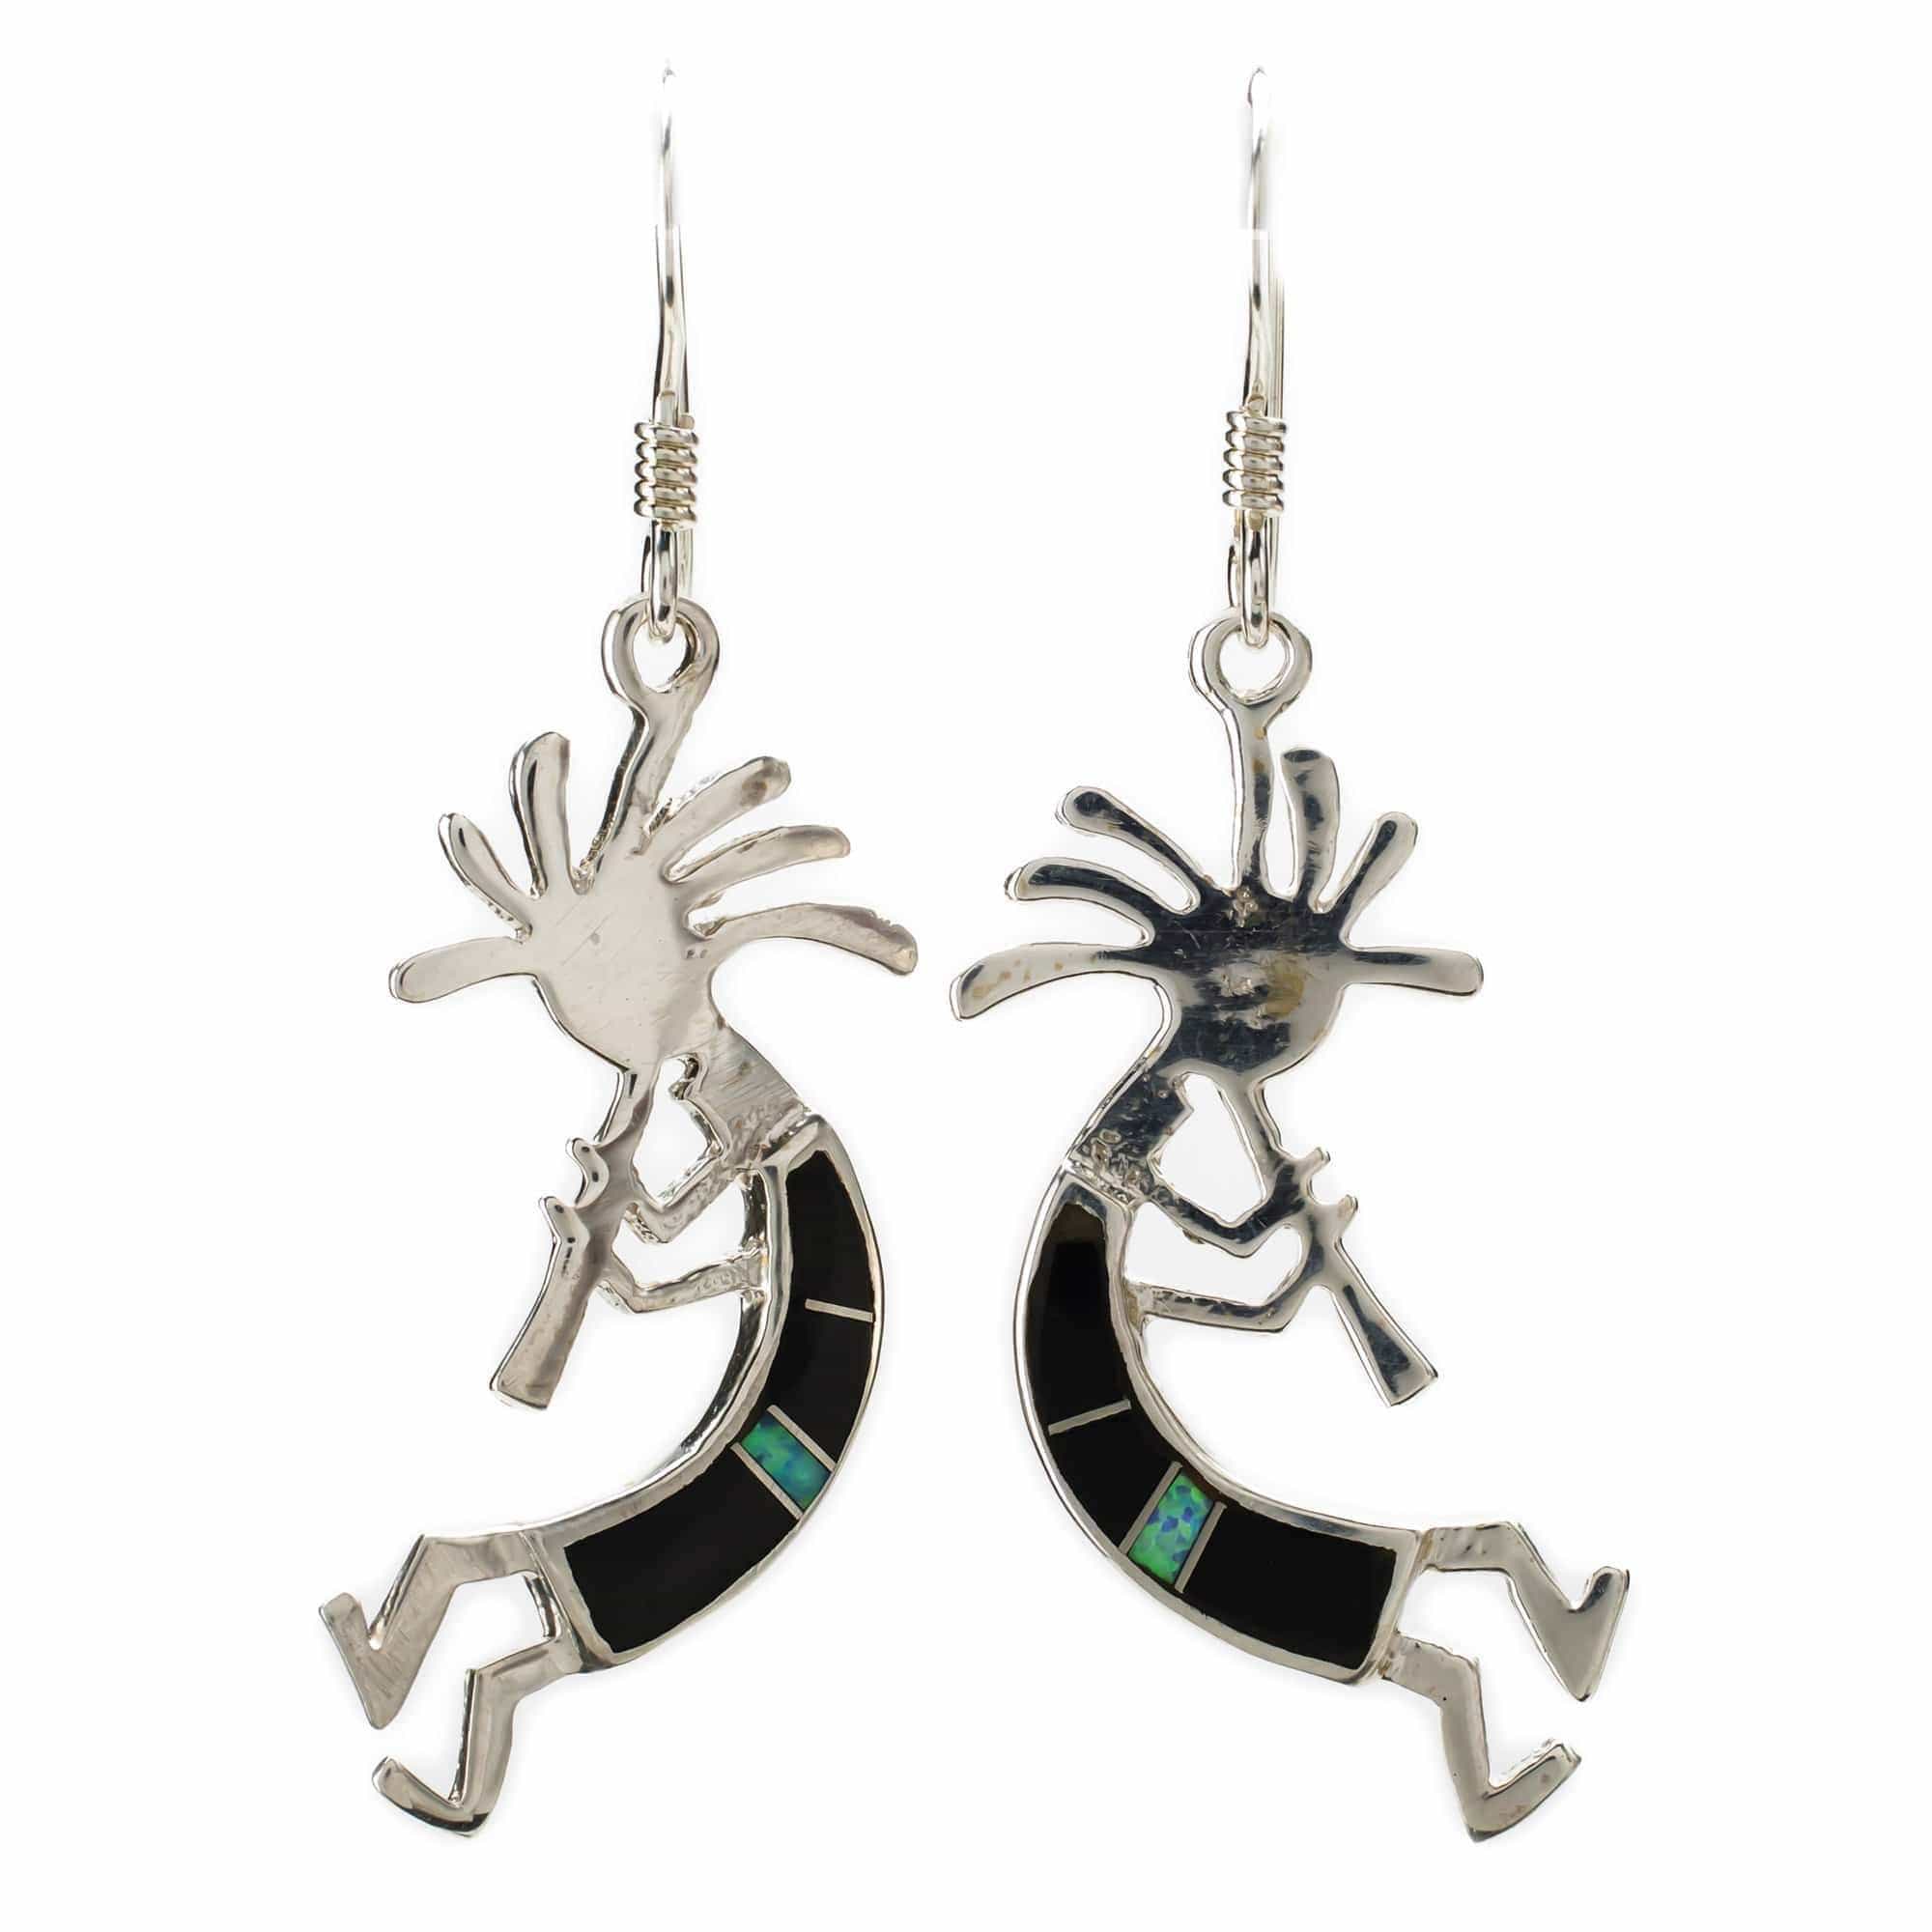 Kalifano Southwest Silver Jewelry Black Onyx Kokopelli 925 Sterling Silver Earring with French Hook USA Handmade with Aqua Opal Accent NME.0441.BO